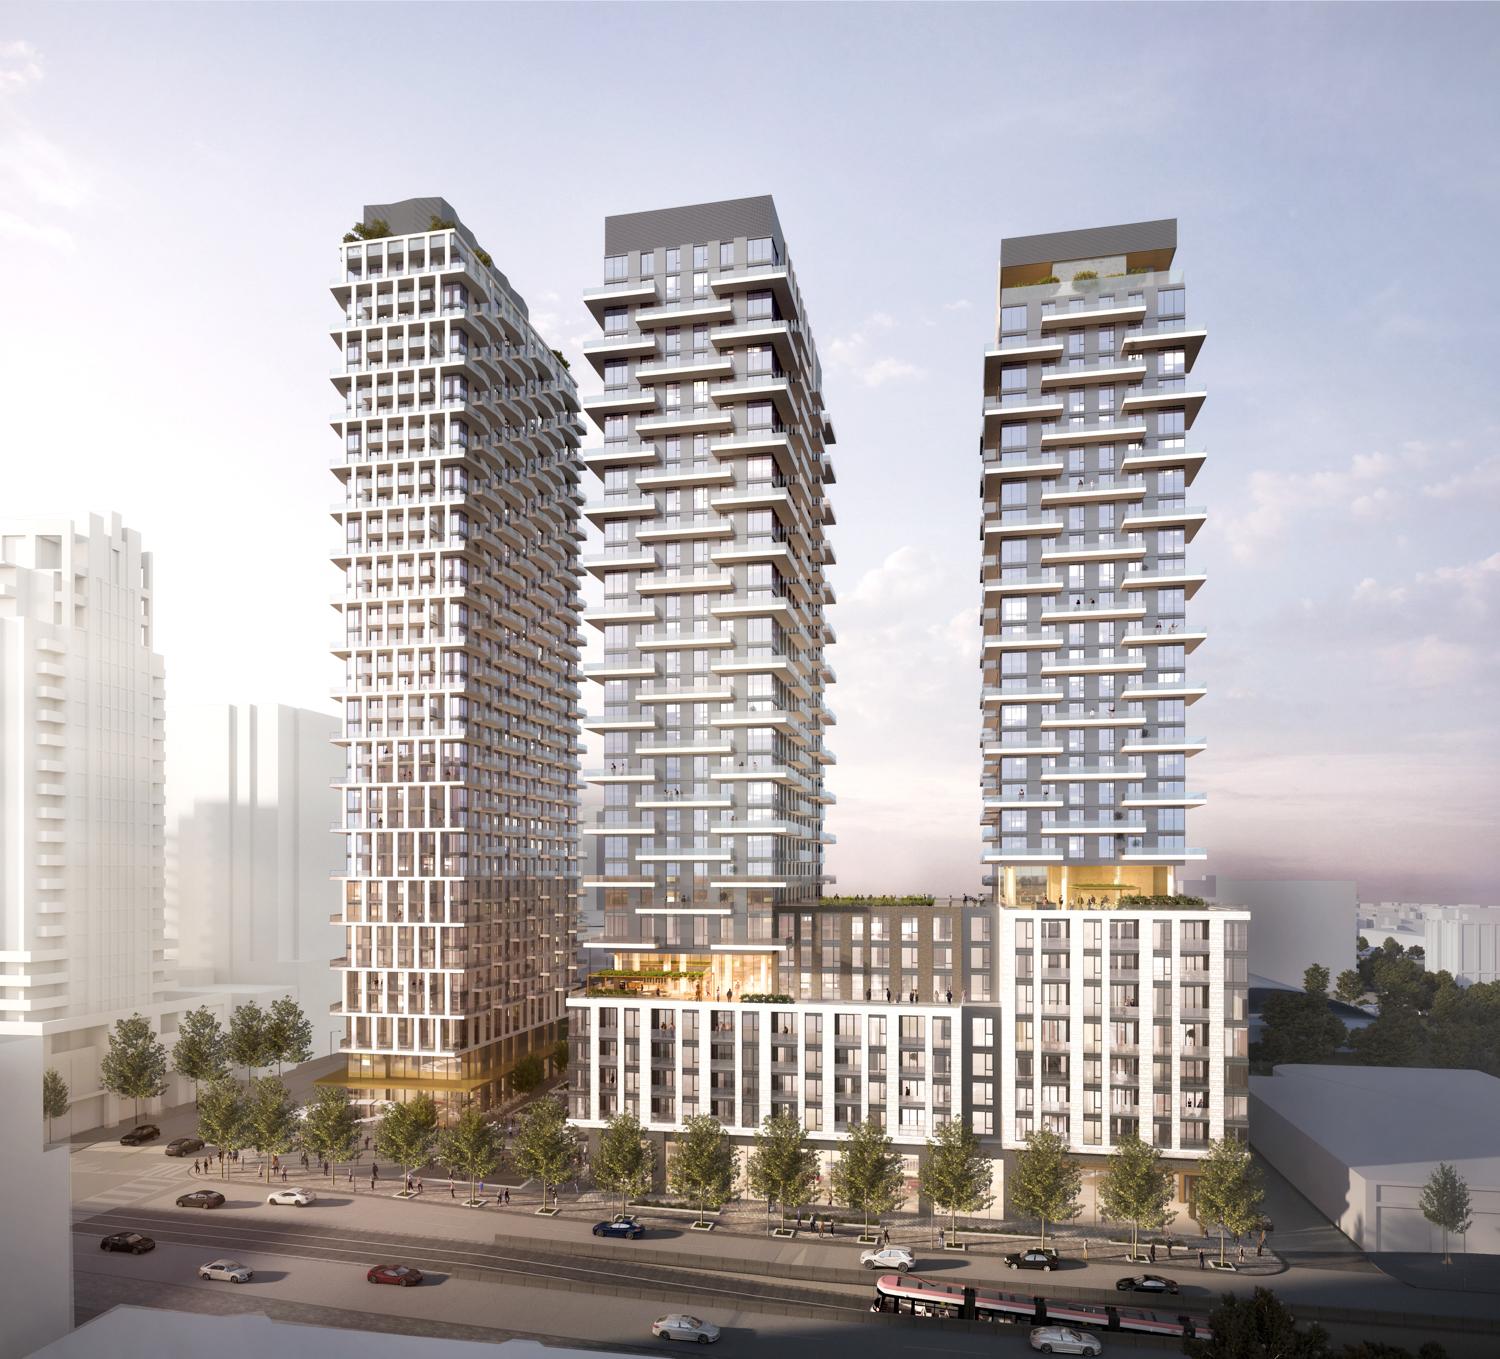 rendering of three residential towers atop a shared podium overlooking a park